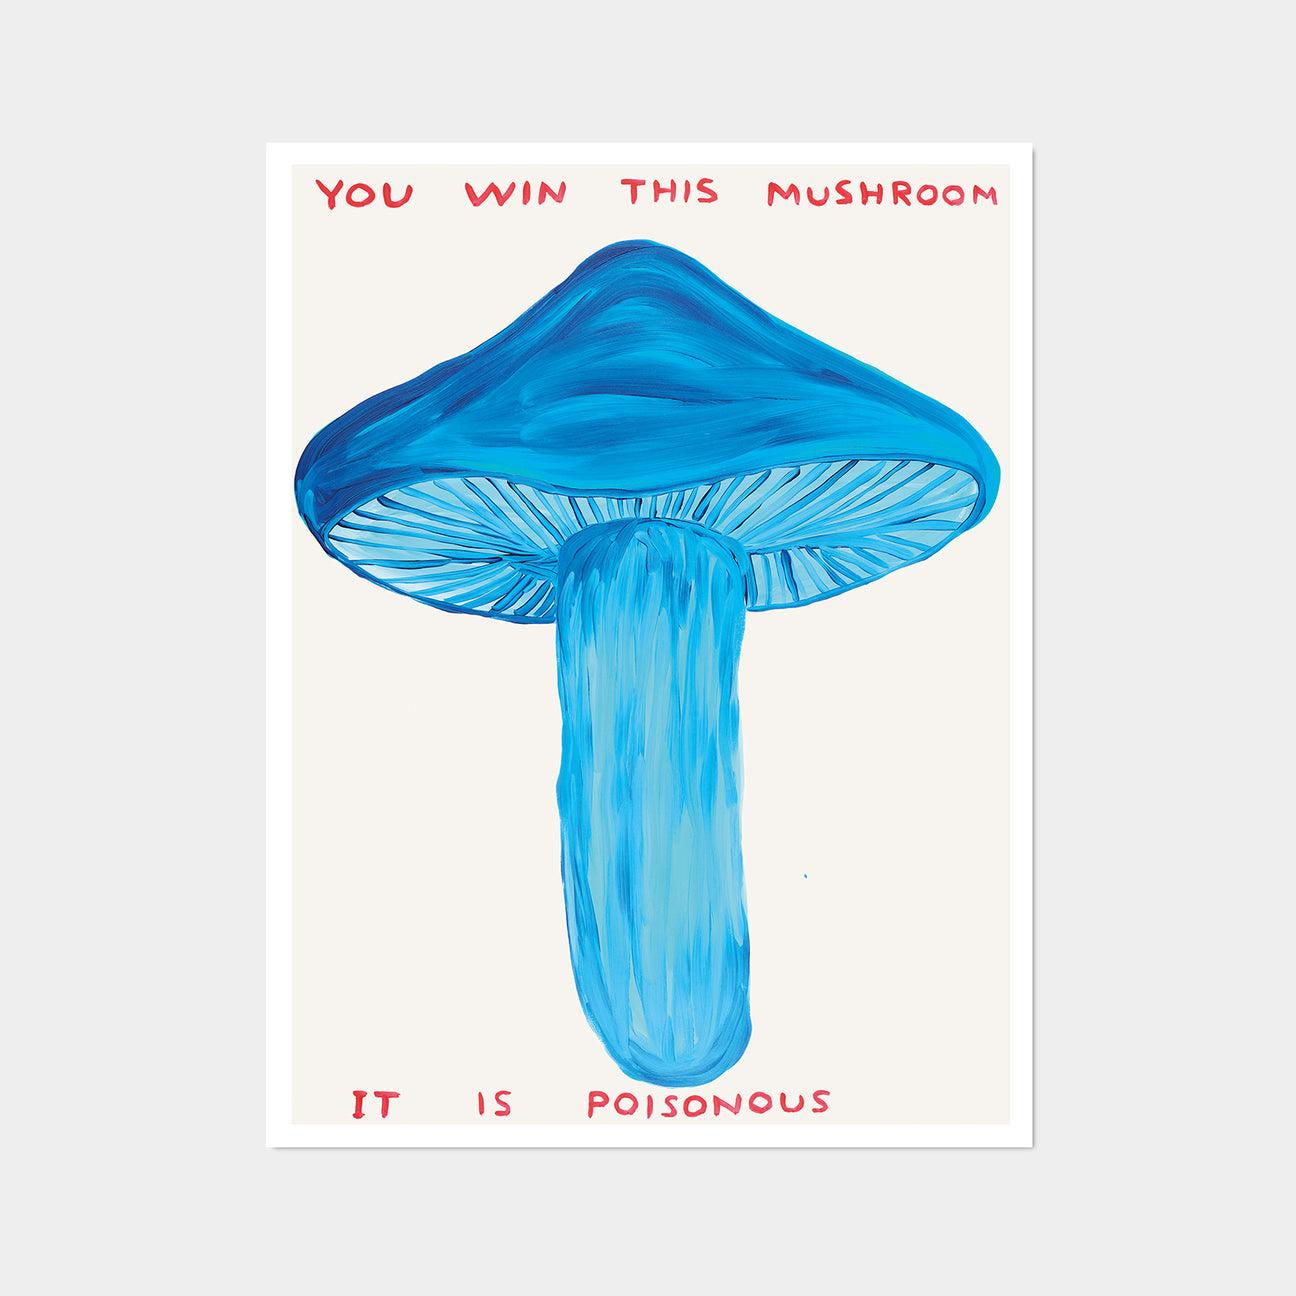 David Shrigley, You Win This Mushroom, 2020 

Off-set lithograph
Unframed 
60 x 80 cm (23.62 x 31.5 inches) 
Printed on 200g Munken Lynx paper by Narayana Press in Denmark 

David Shrigley’s work is humorous, interspersed with his witty observations